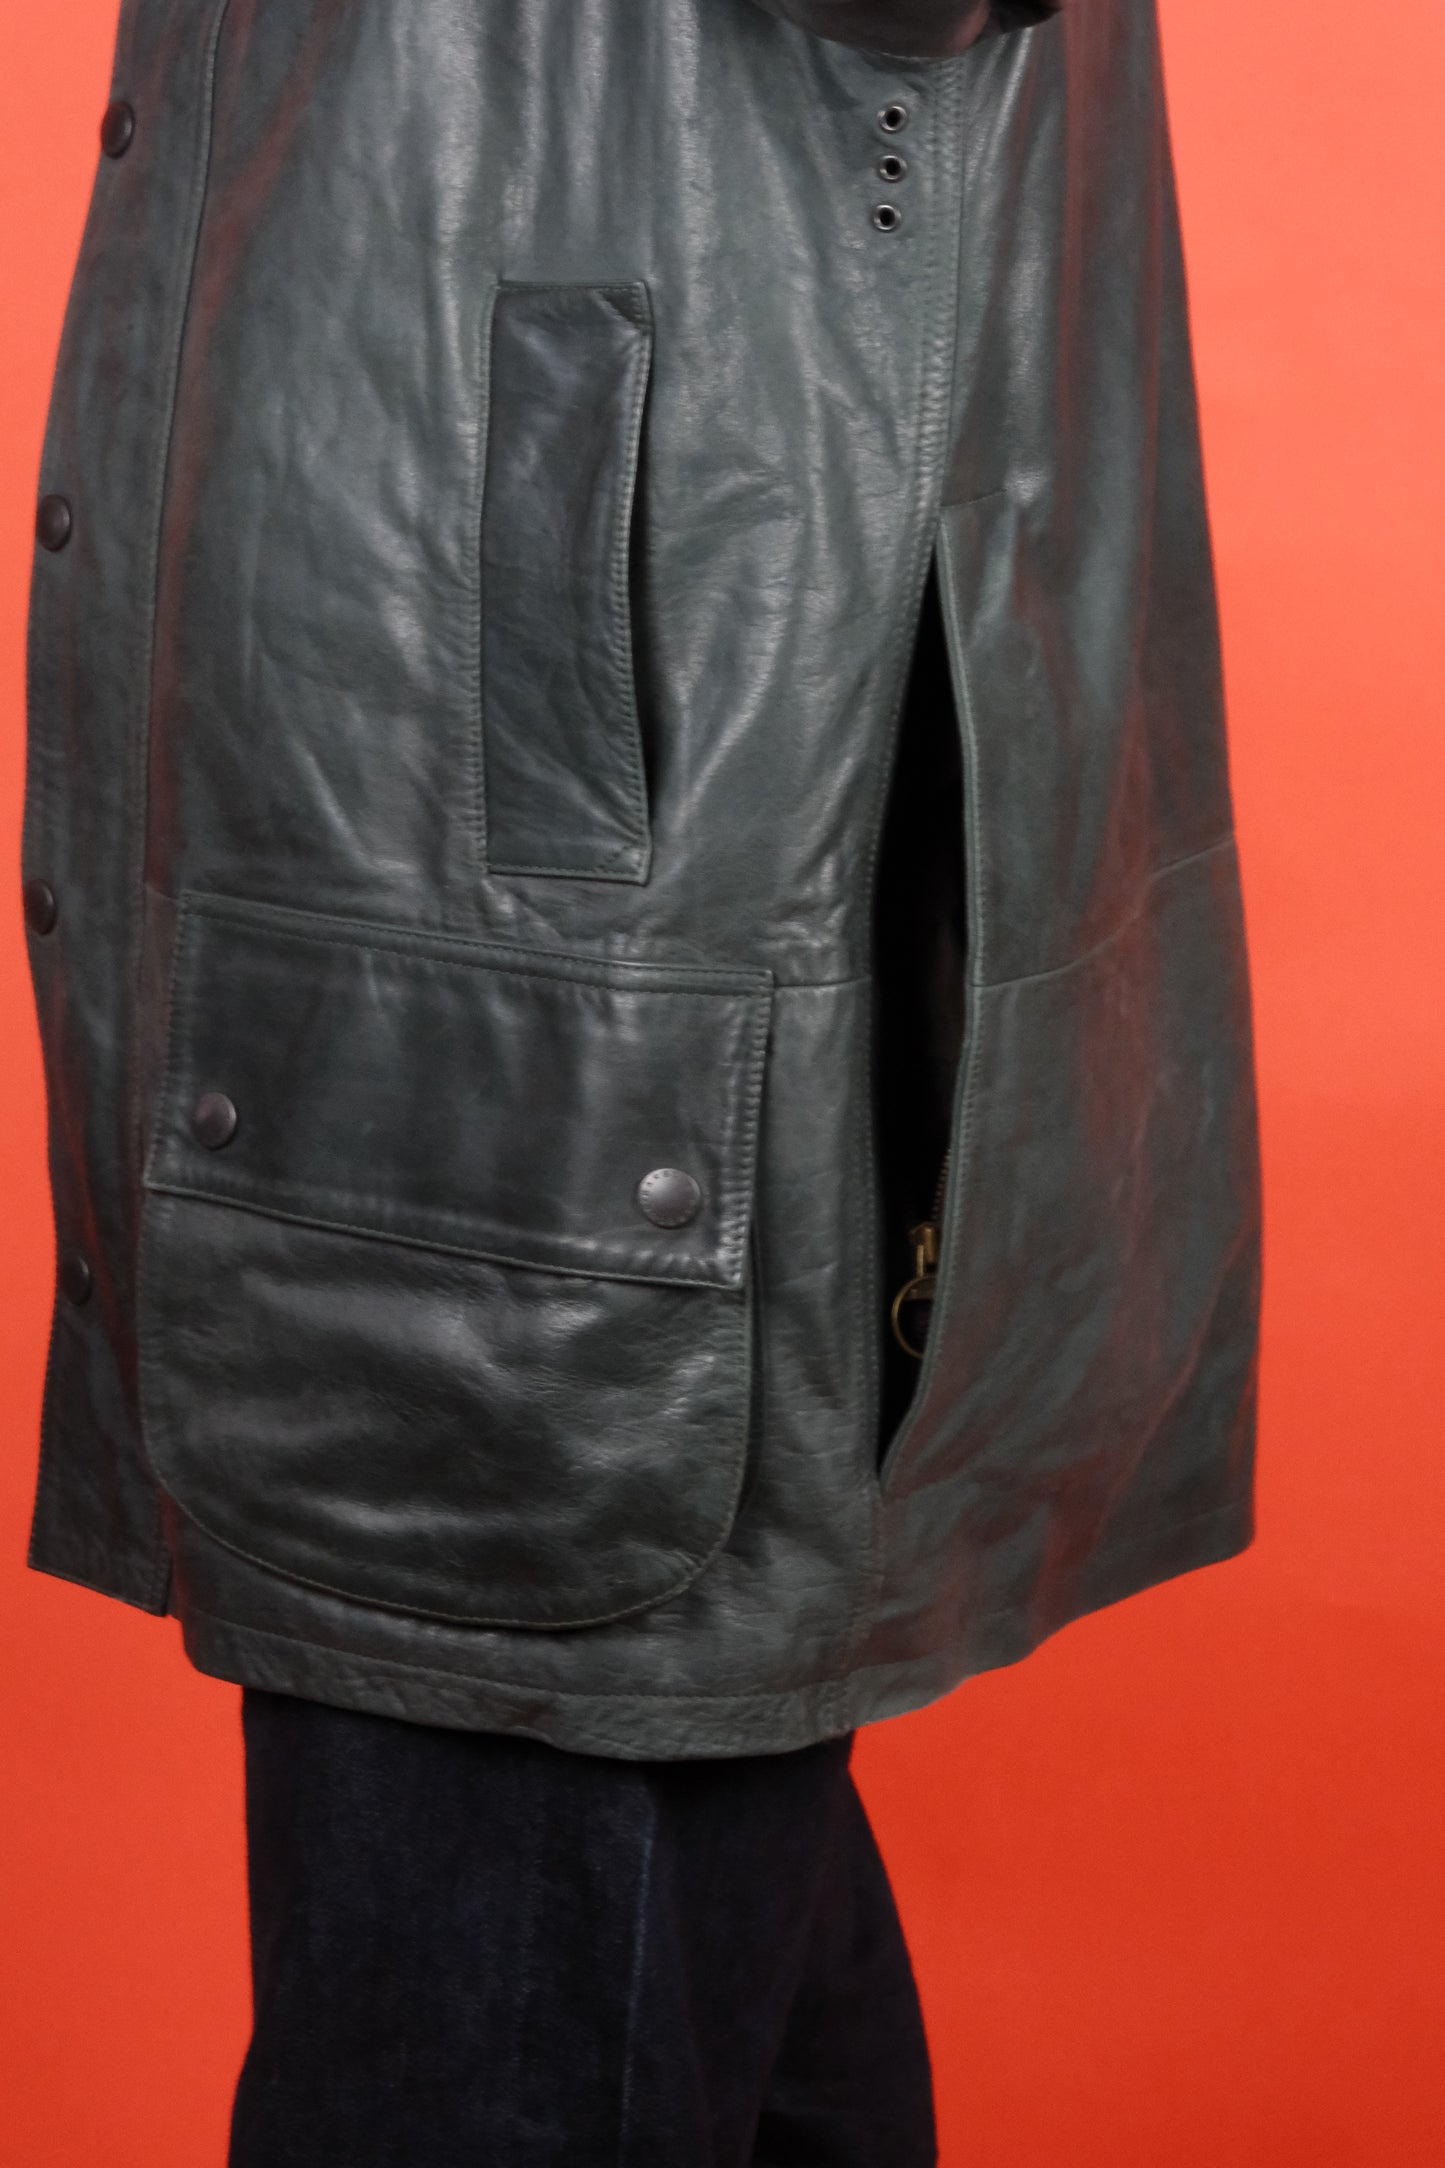 Barbour Beaufort Leather Jacket w/ Wool Lining Limited Edition 'M' - vintage clothing clochard92.com